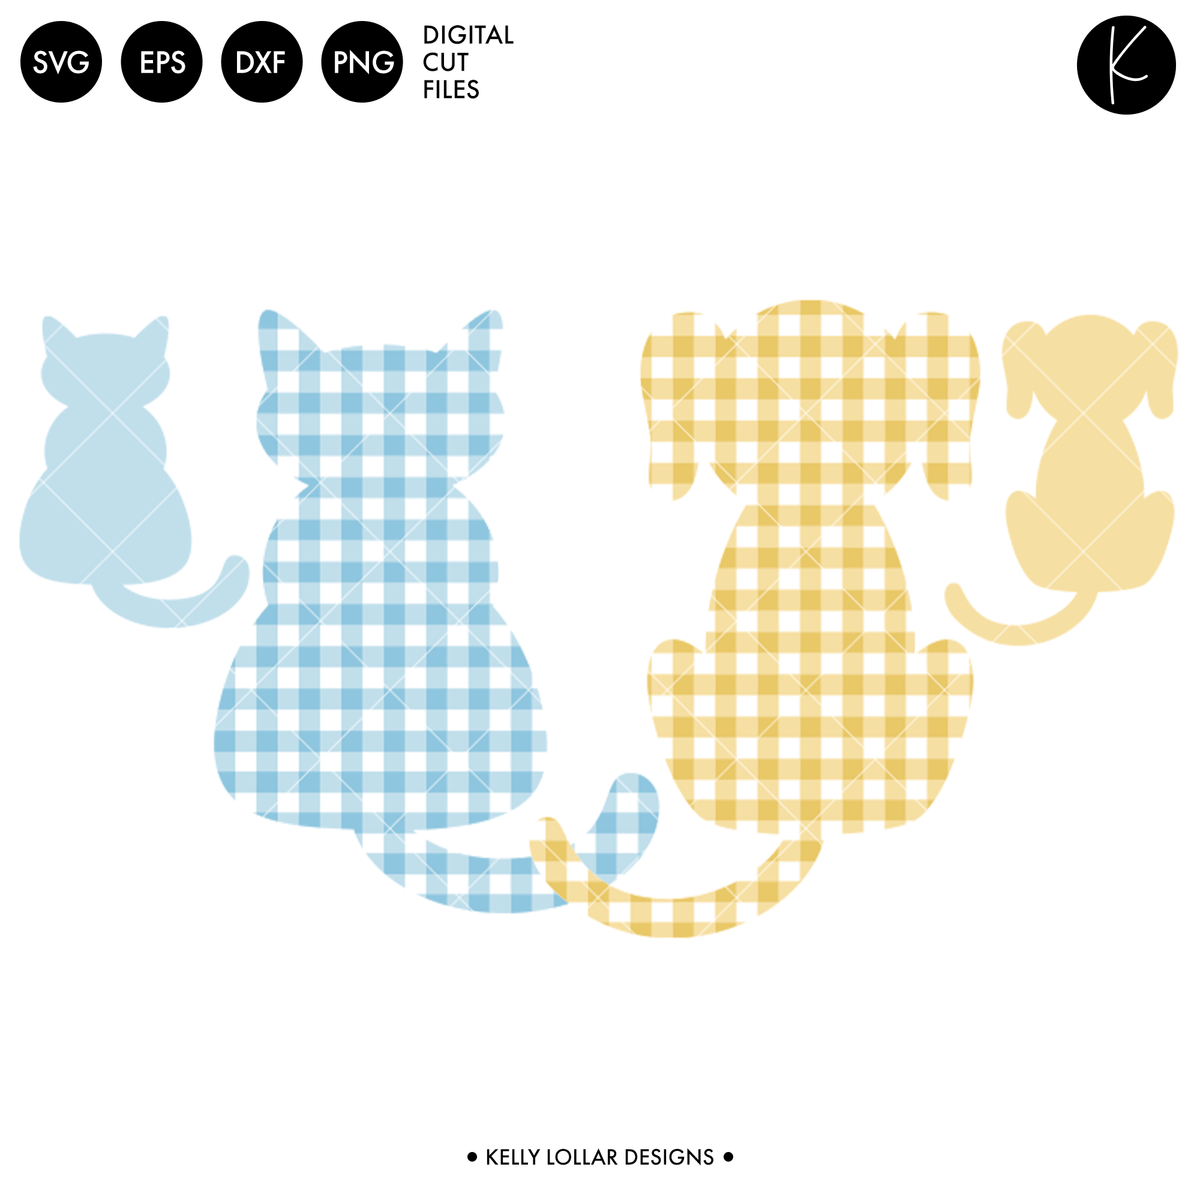 Gingham Cat and Dog Silhouettes | SVG DXF EPS PNG Cut Files